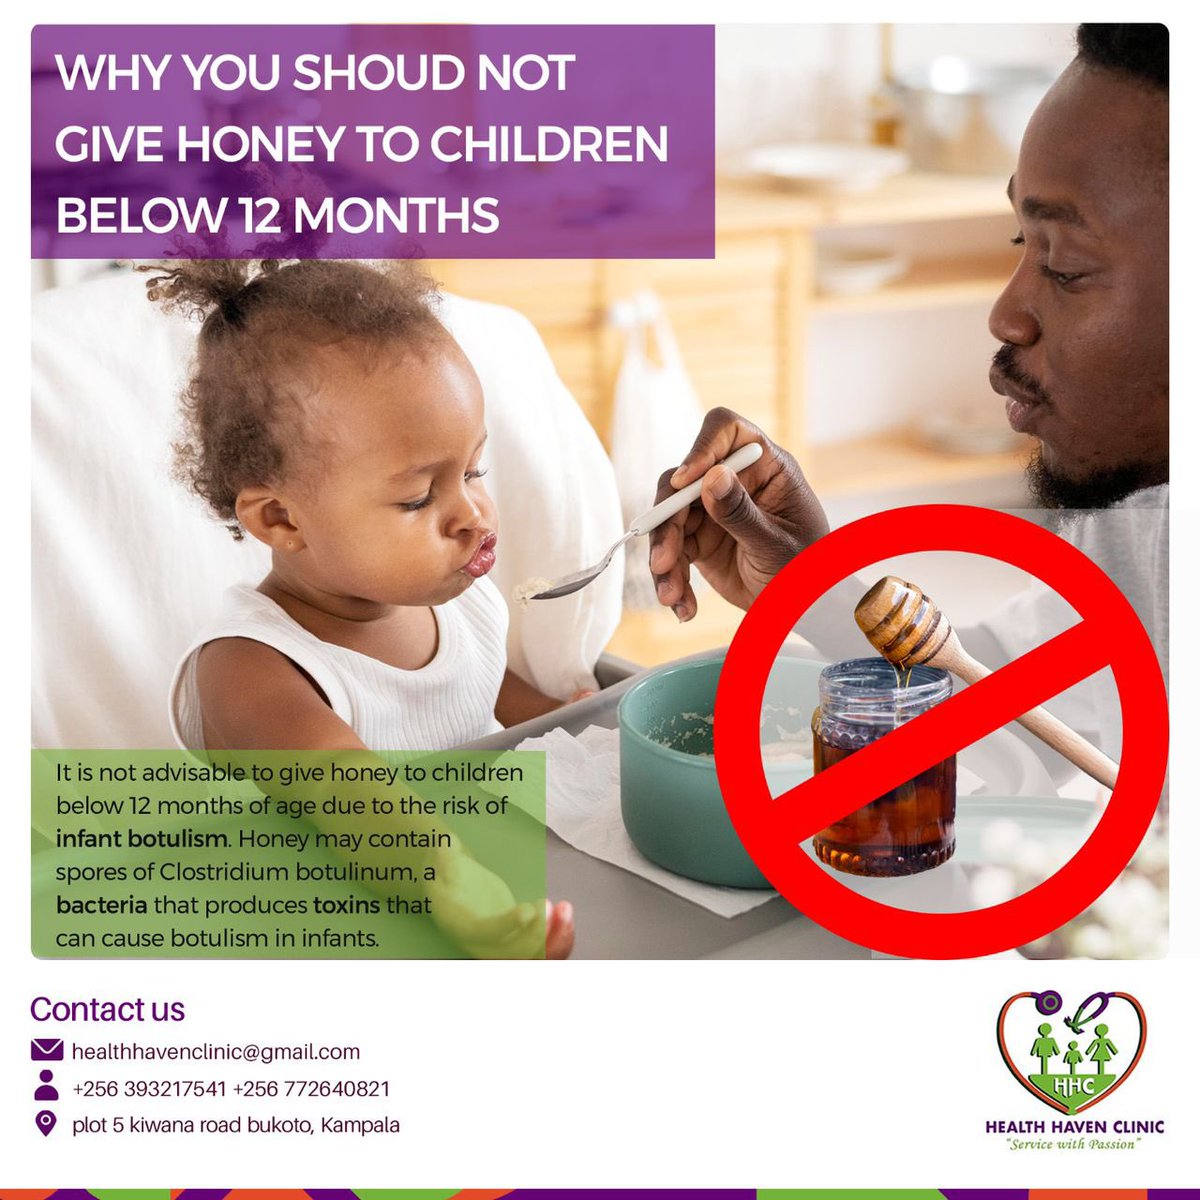 Start the week off right: Parents, remember that honey should not be given to children under 1 year old. Keep your little ones safe from the risk of botulism. #HealthHavenClinicUg